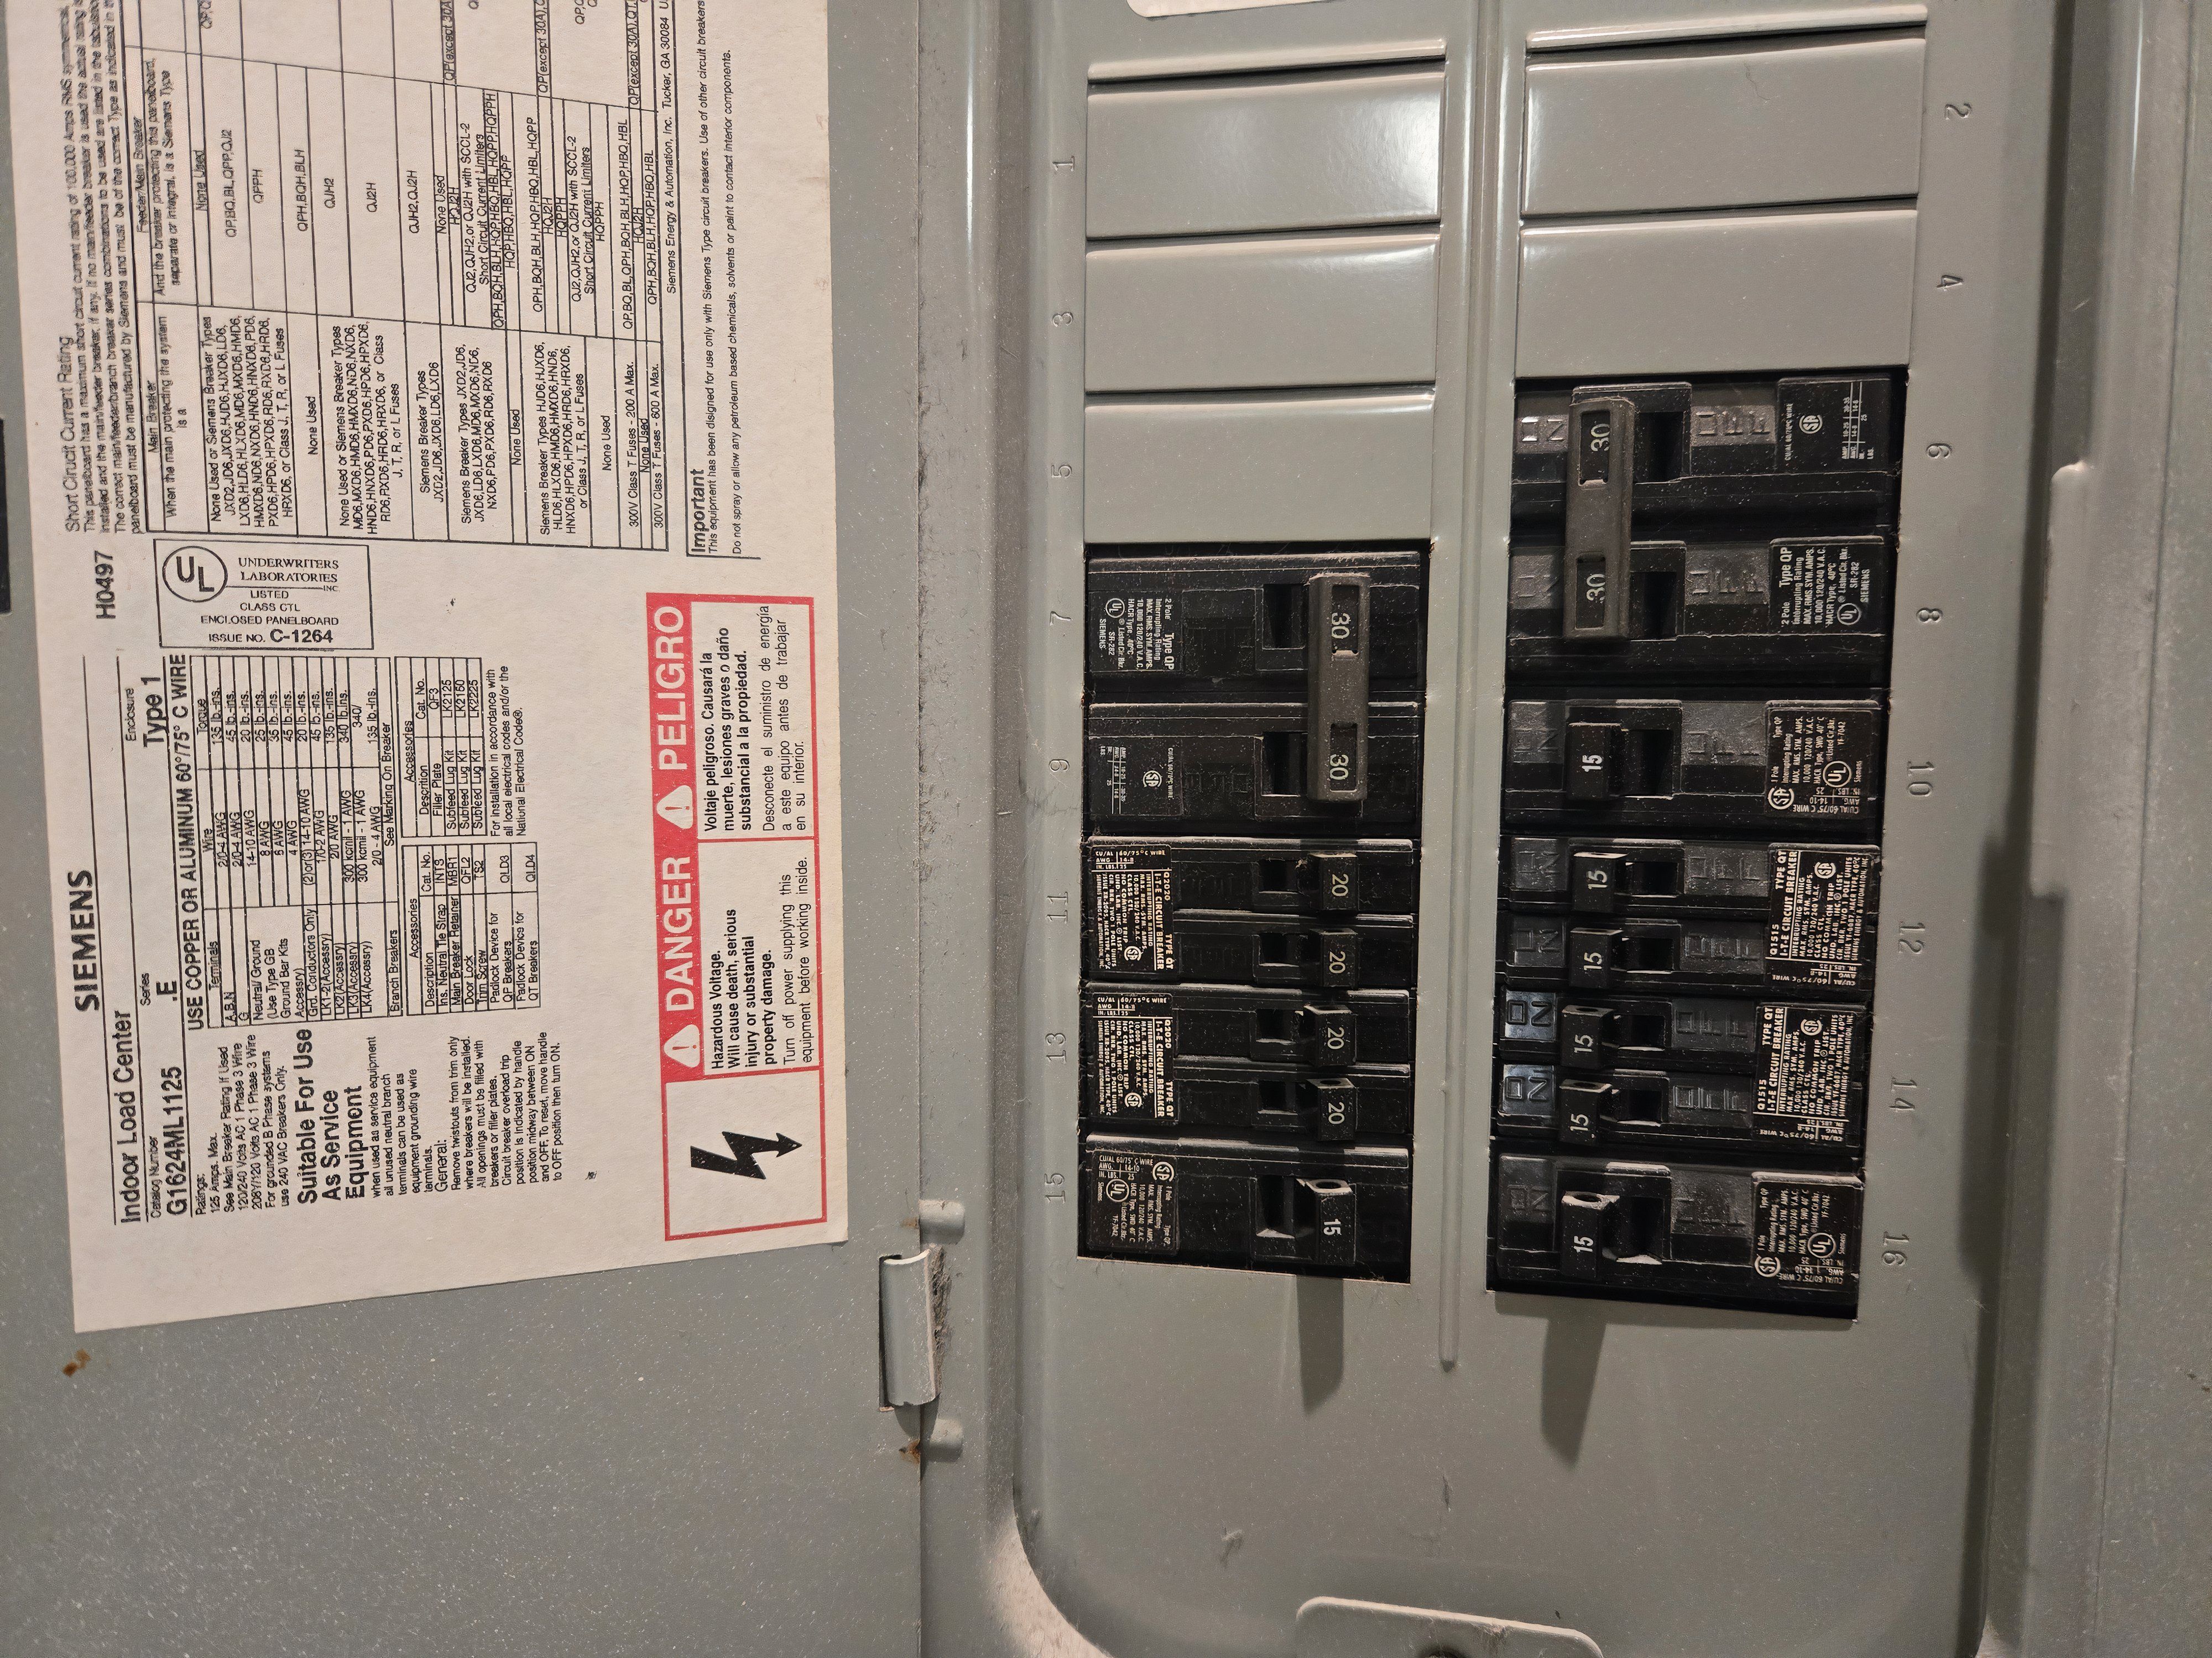 Check if the switches in the breaker box are on or tripped